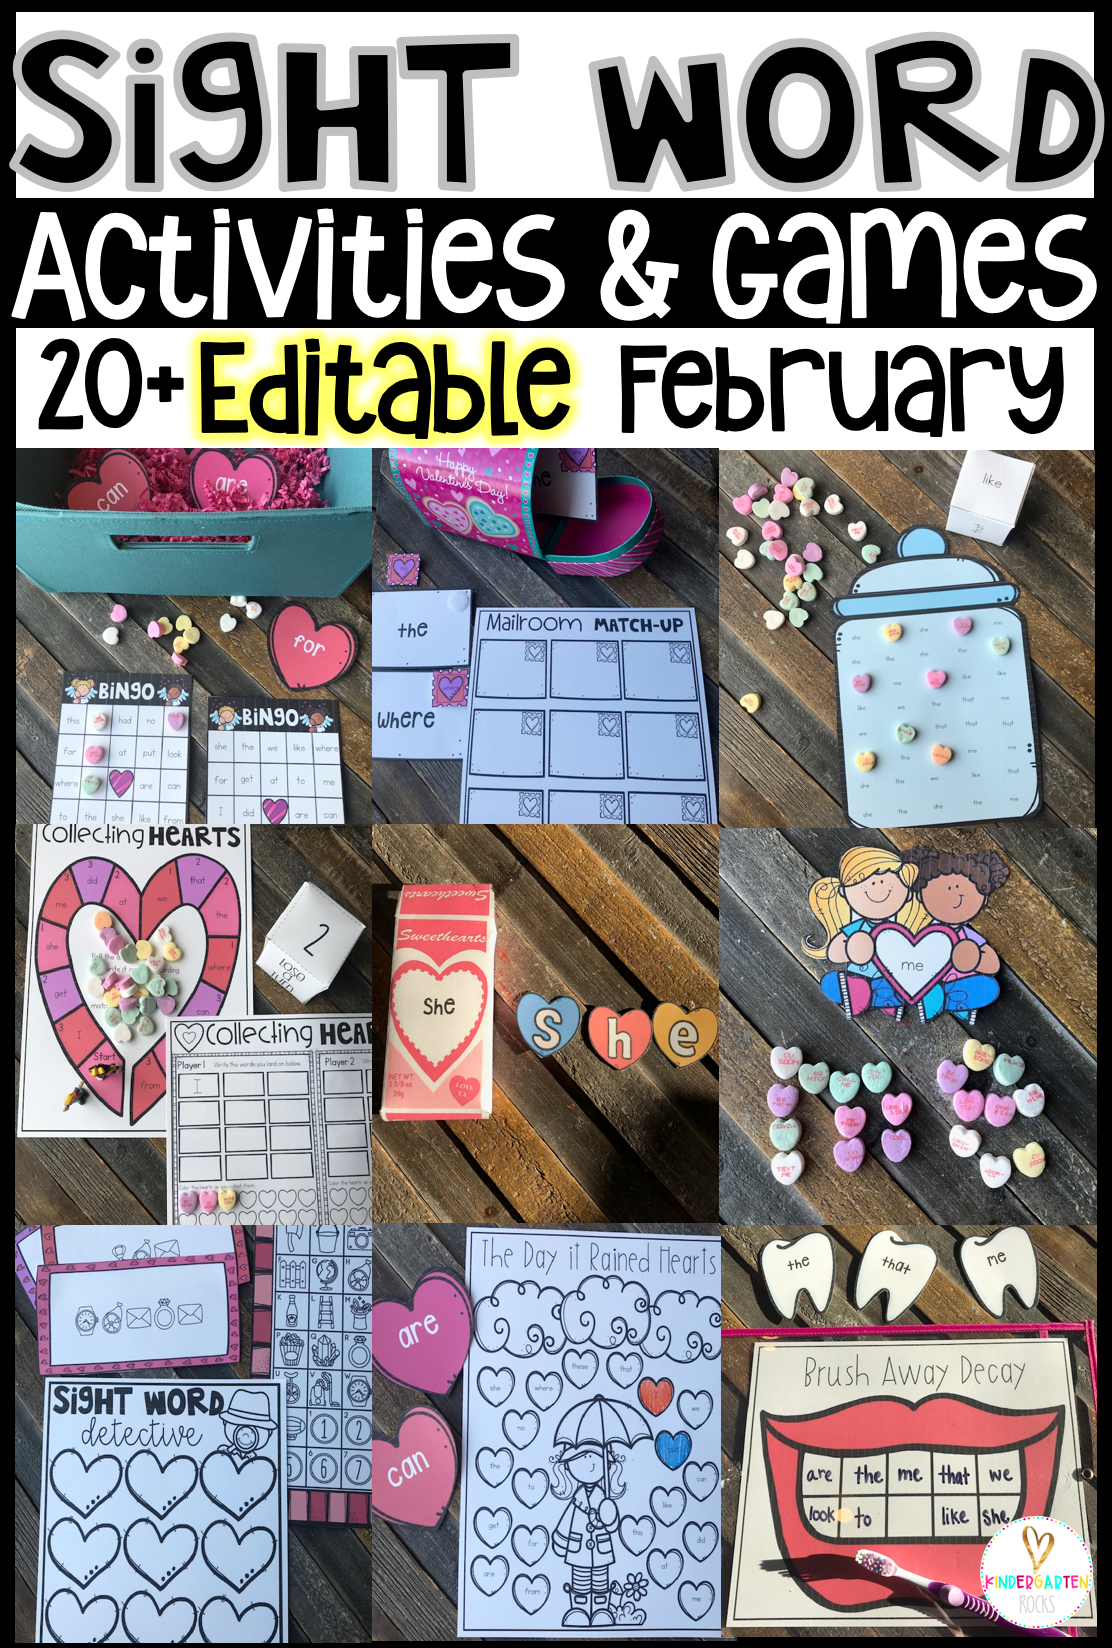 Are you looking for Valentine's Day sight word games and activities that you can change to meet the needs of your kindergarten or first grade students? Then, you will love Editable Sight Word Activities, Printables and Games for February. Type in 20 sight words on one list and they will spread throughout all of the activities.